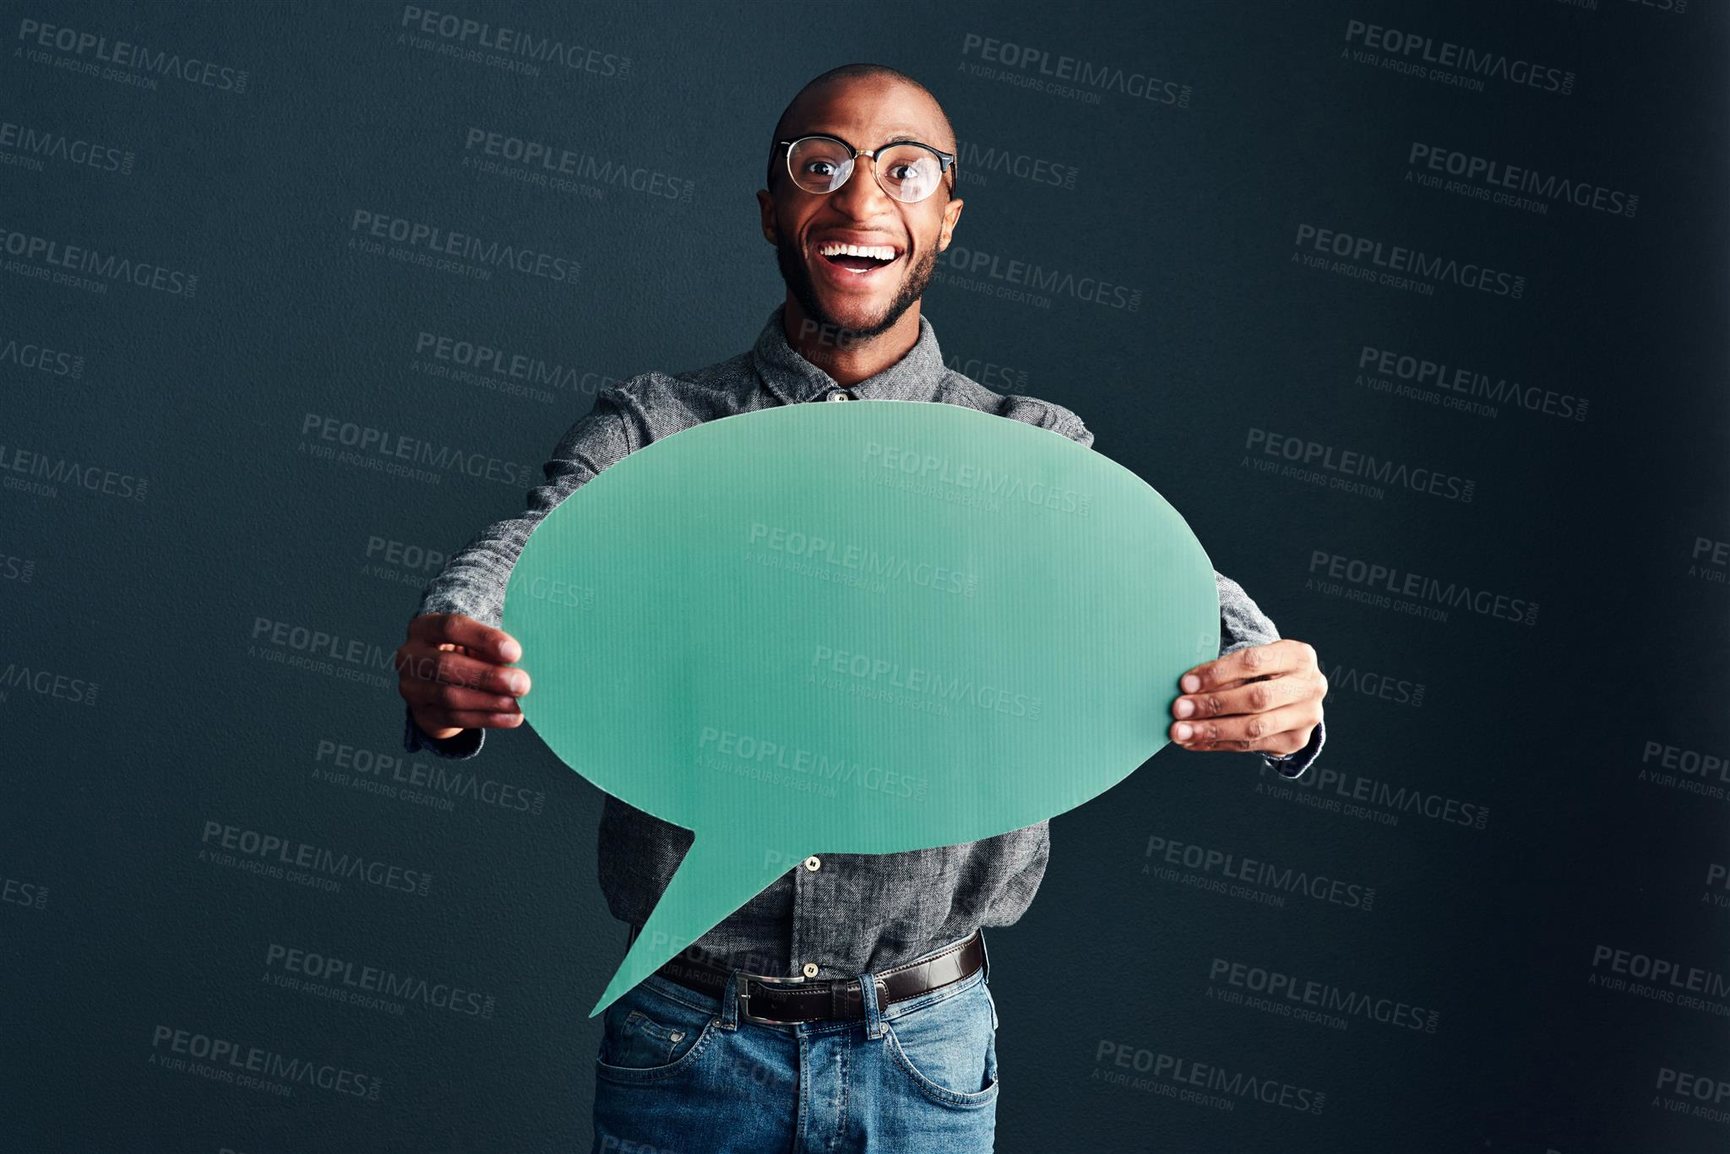 Buy stock photo Studio shot of a handsome young man holding a speech bubble